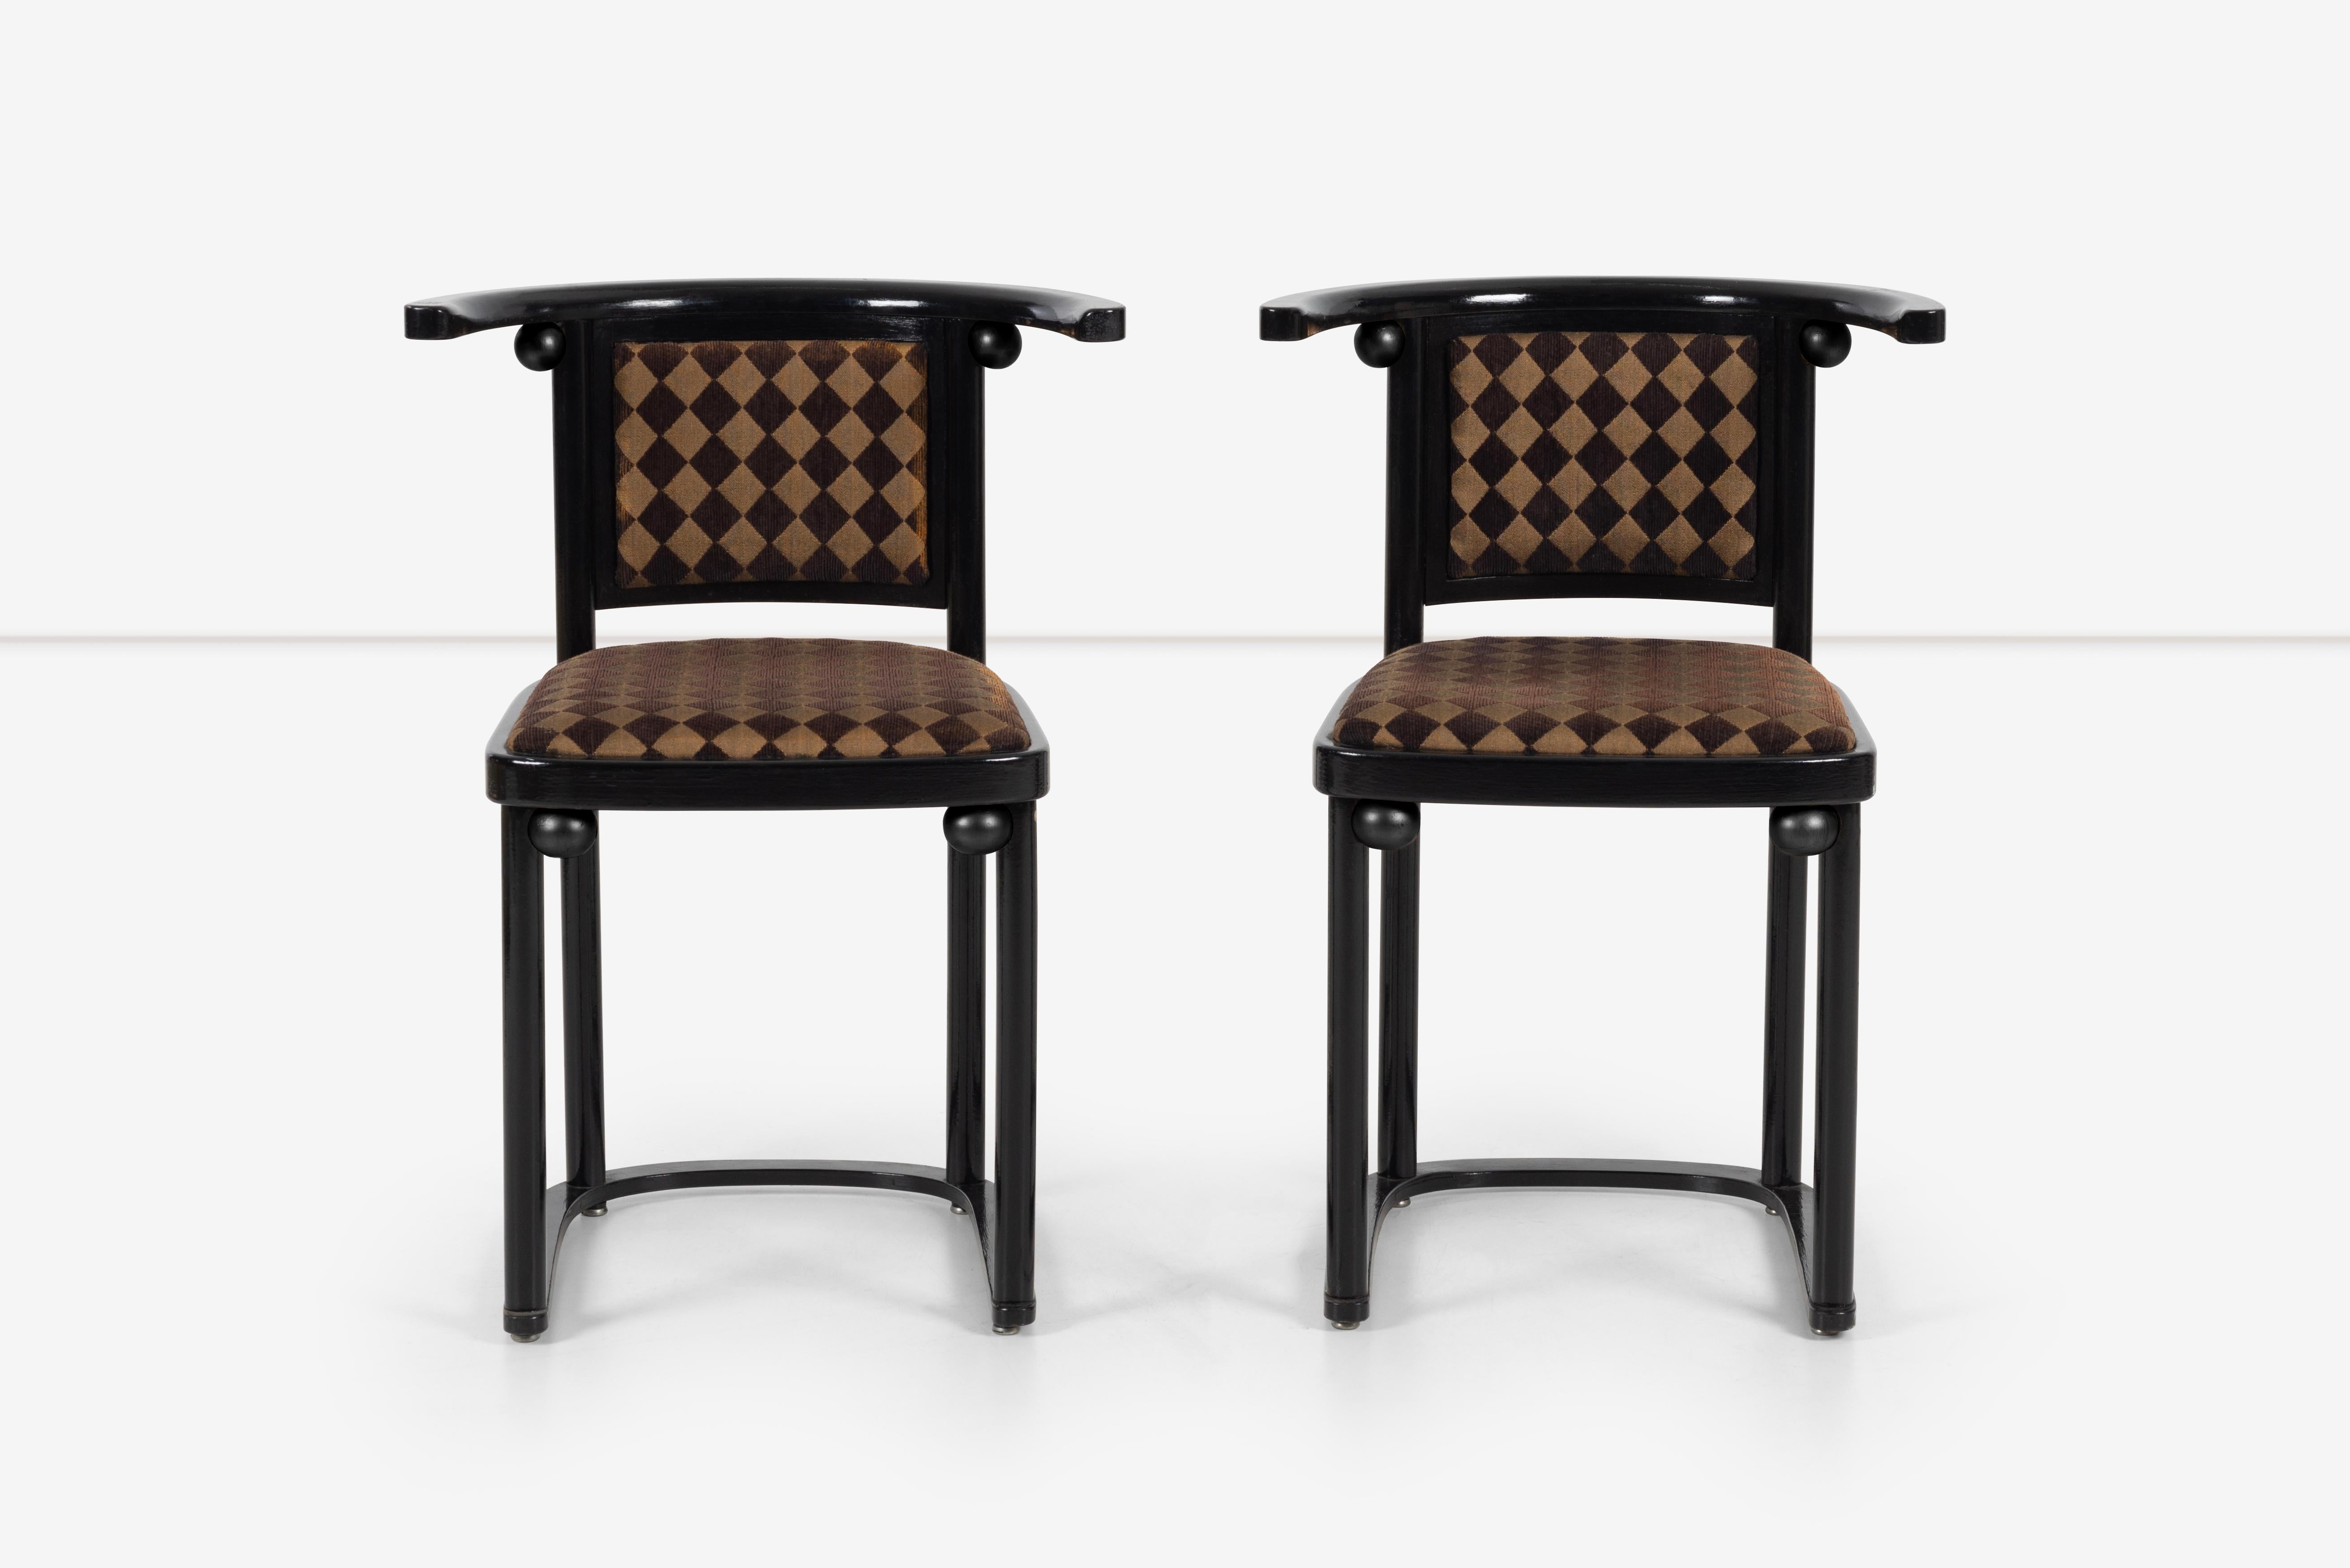 These Josef Hoffmann's black painted Fledermaus chairs are a classic and iconic piece of furniture that has been a mainstay in modern design since its creation in the early 20th century. The chair's distinctive design features a sleek and elegant